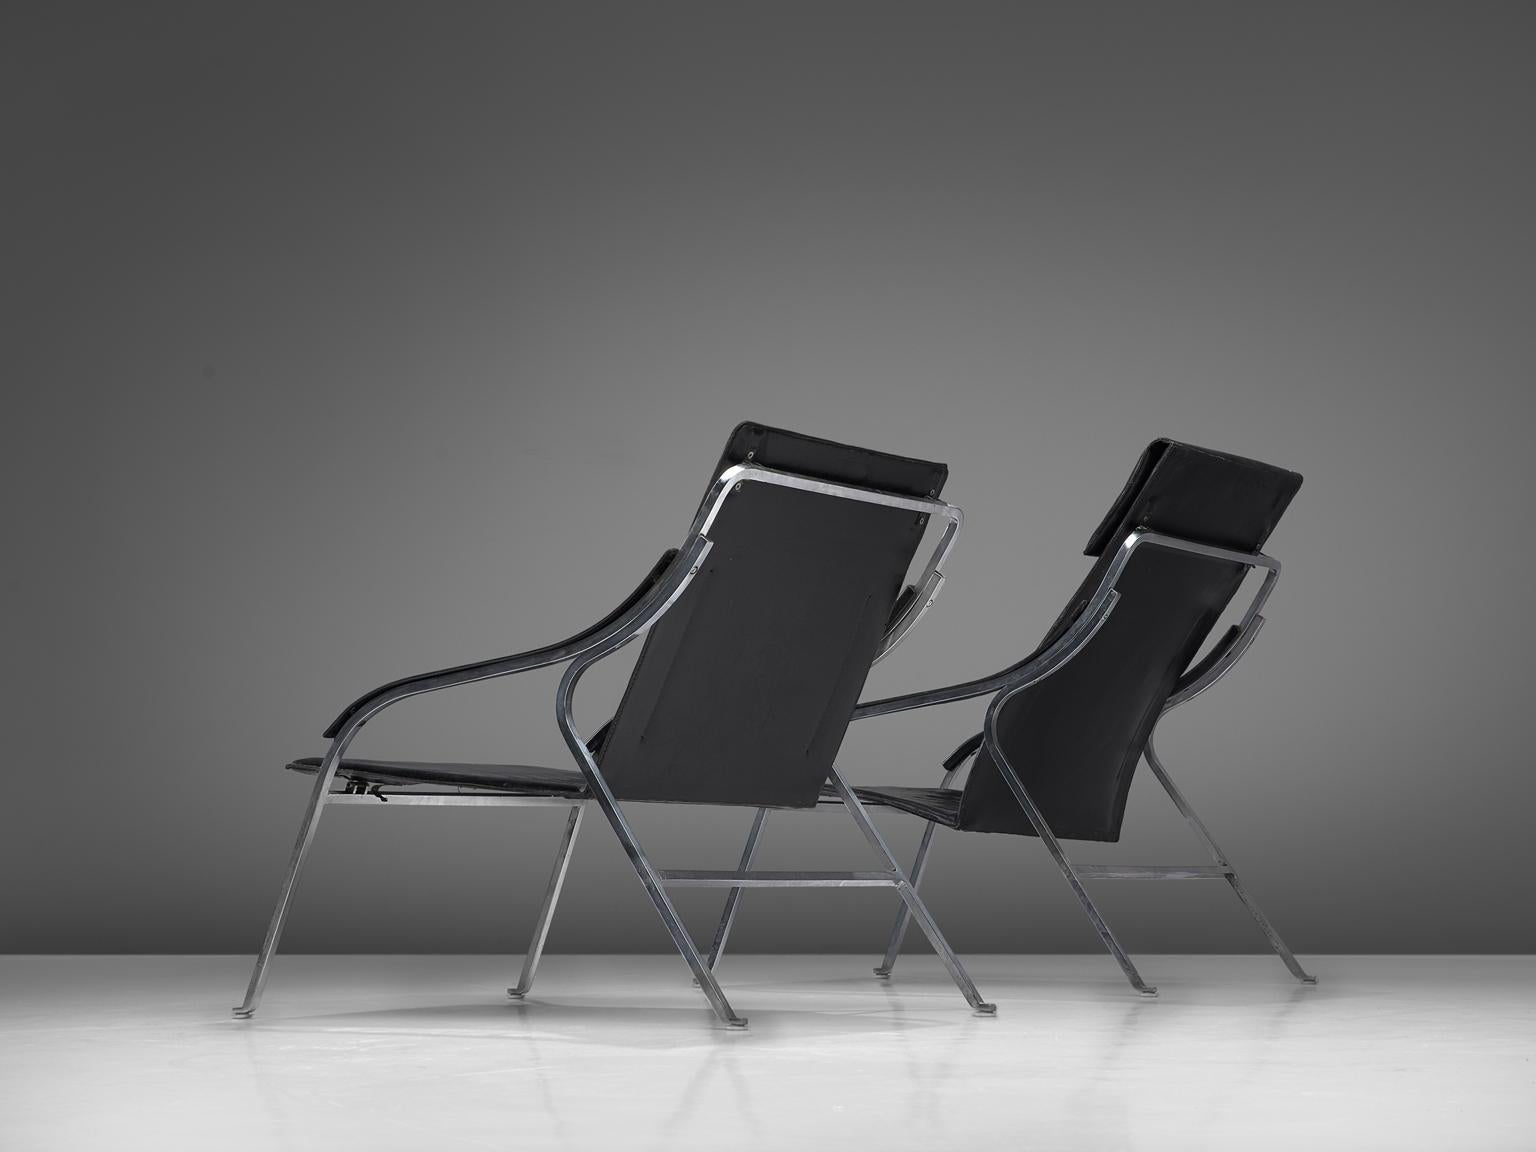 Marco Zanuso for Arflex, fourline lounge chairs, black leather and steel, Italy, 1964.

This set of lounge chairs by Zanuso remains among the best examples of armchairs designed by the architect. It is not only the ingenious slender design that